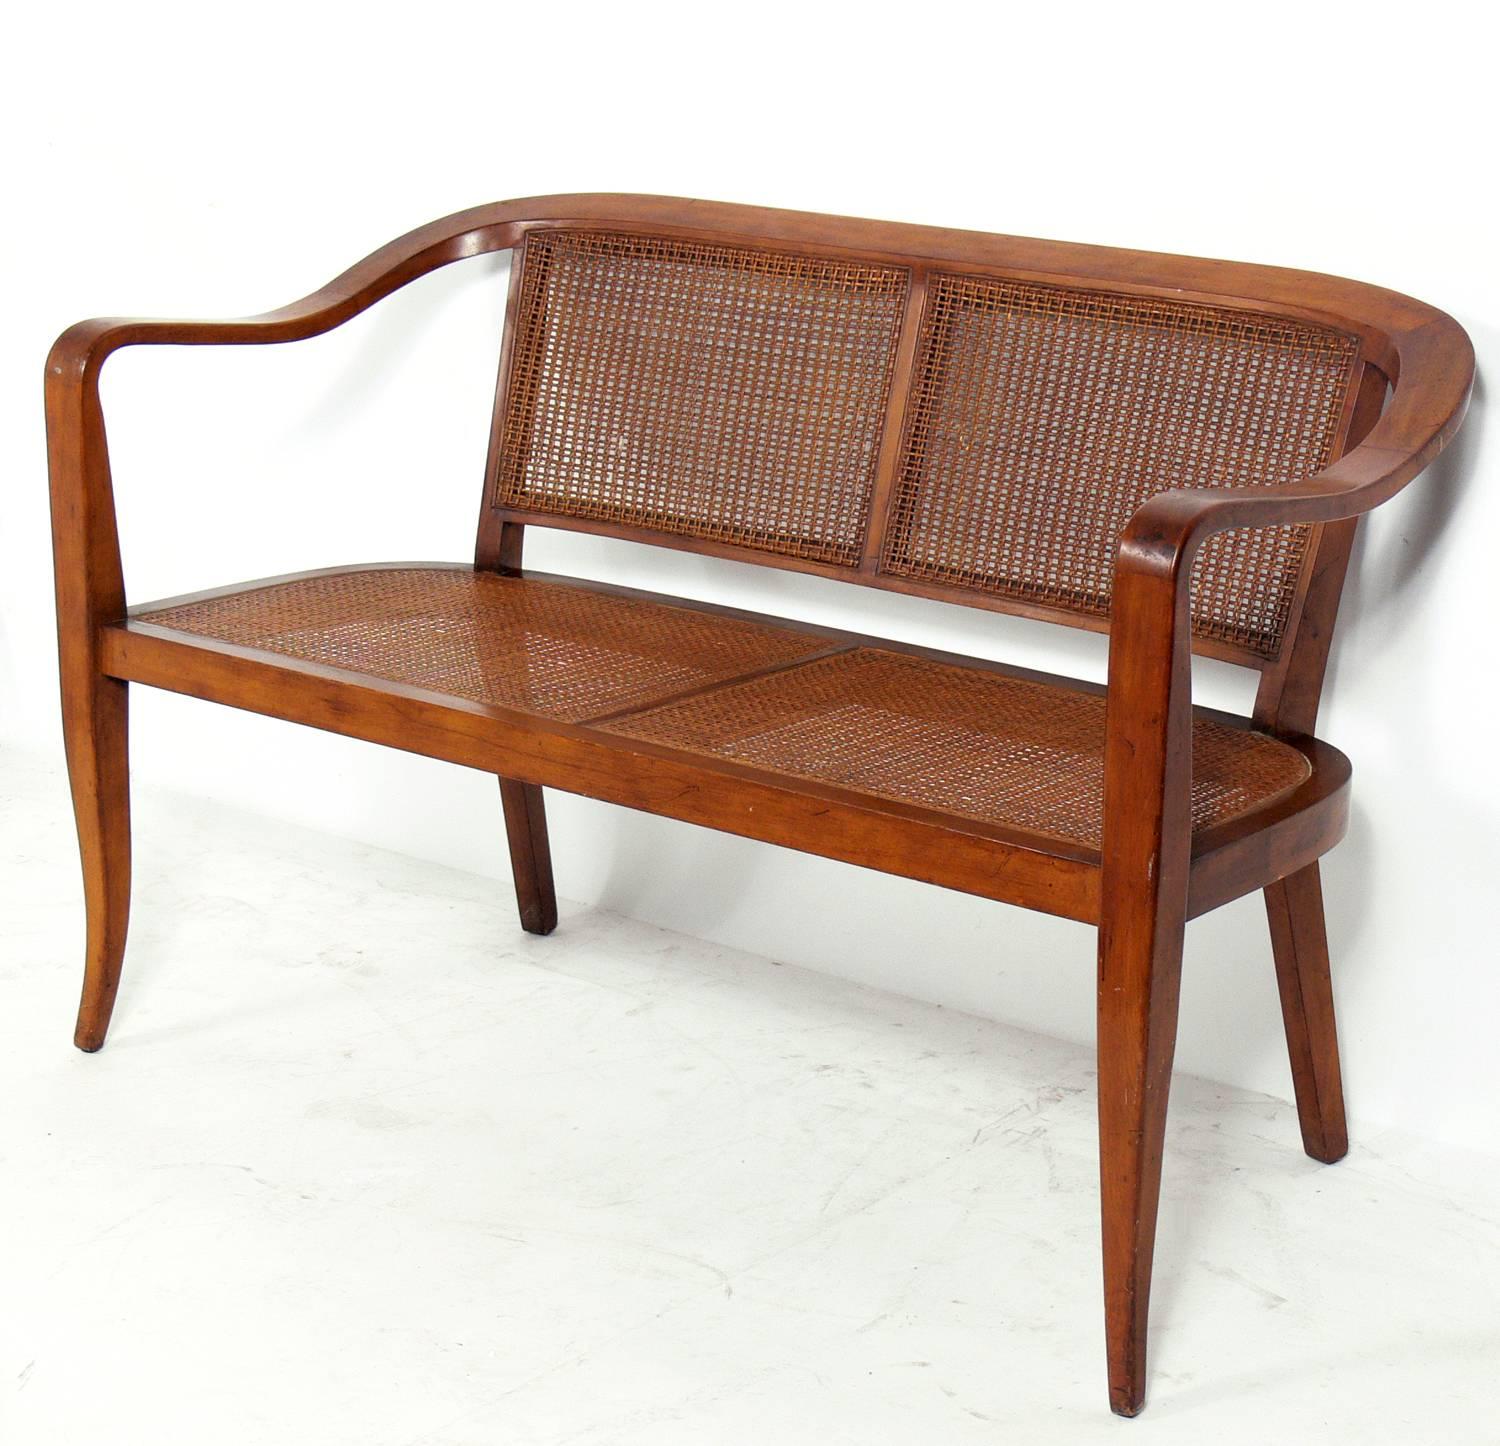 Curvaceous settee or bench in the manner of Dunbar, American, circa 1960s.